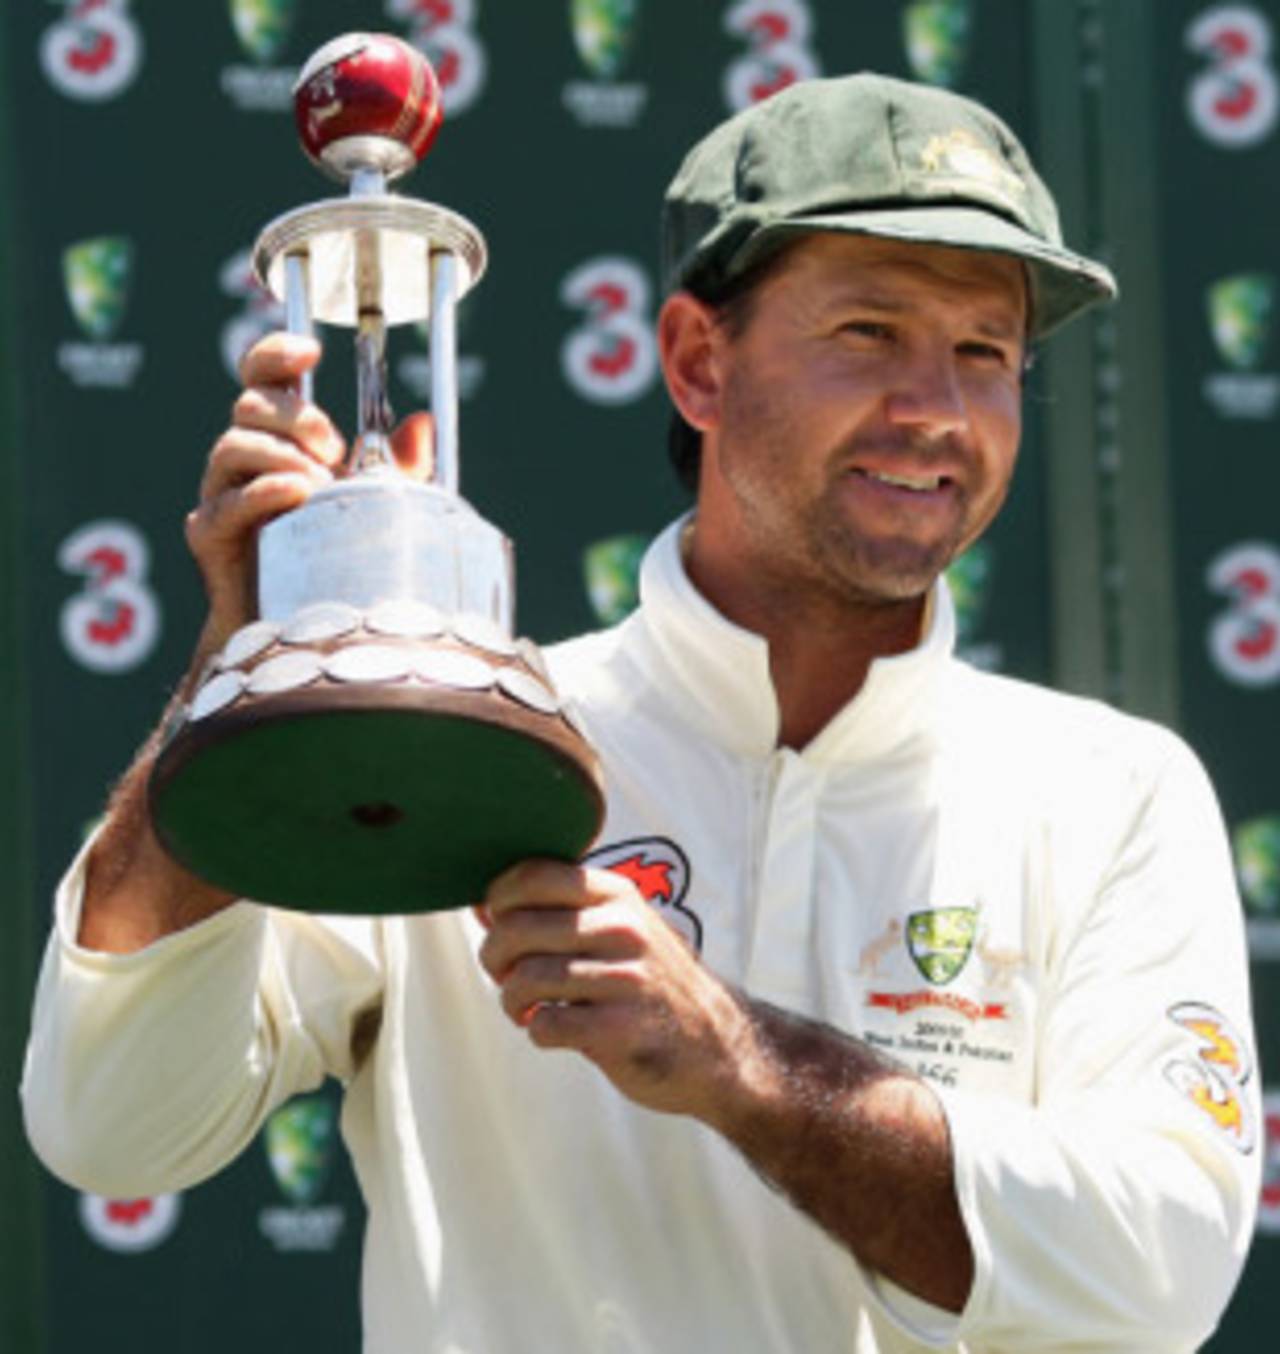 Ricky Ponting lifts the Frank Worrell Trophy, Australia v West Indies, 3rd Test, Perth, December 20, 2009